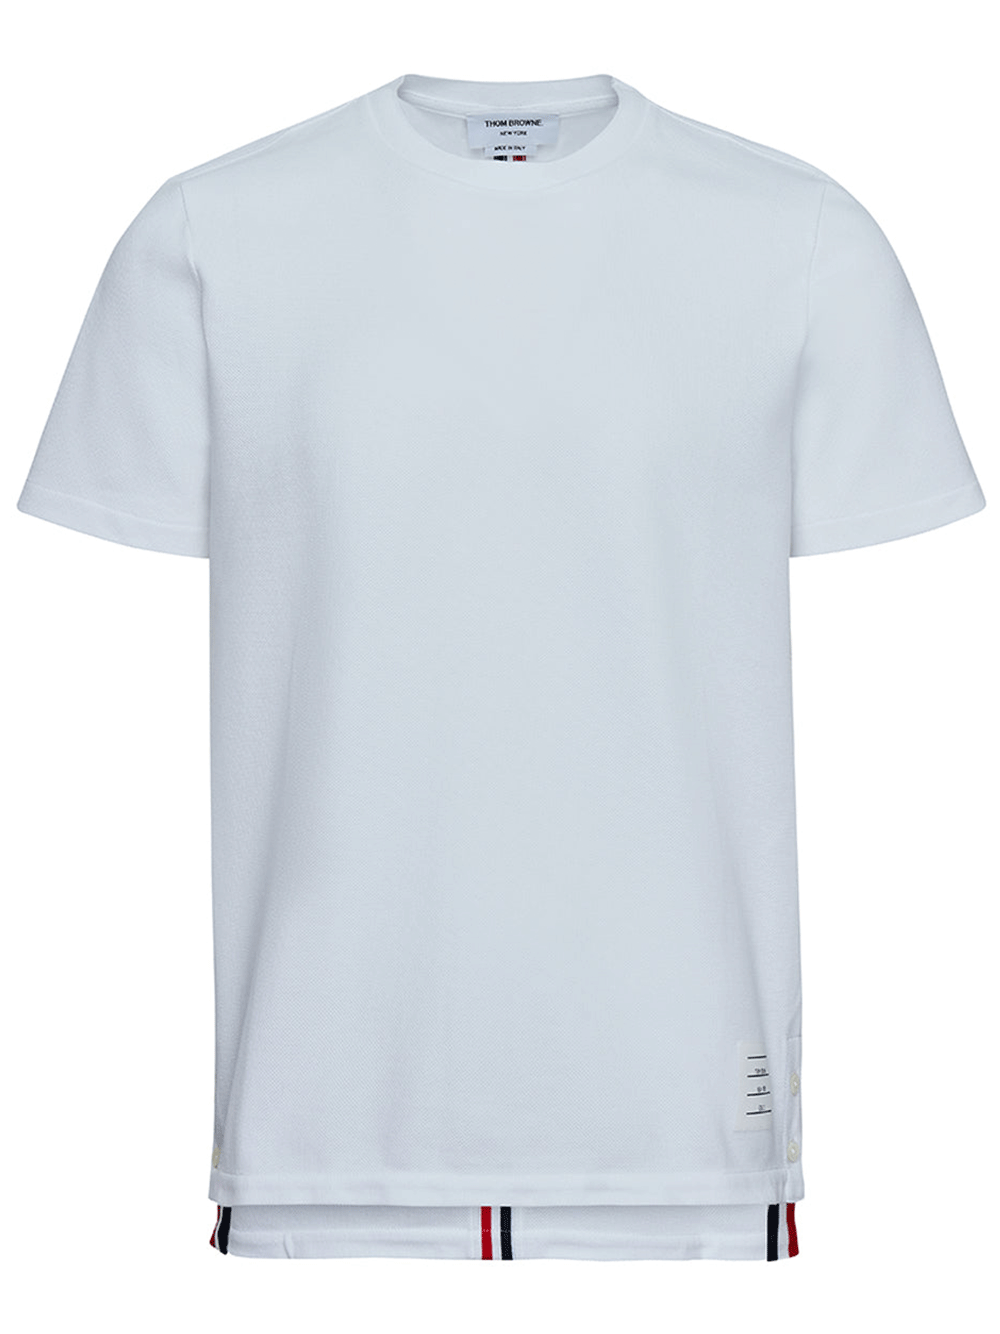 Thom-Browne-Relaxed-Fit-Tee-White-1